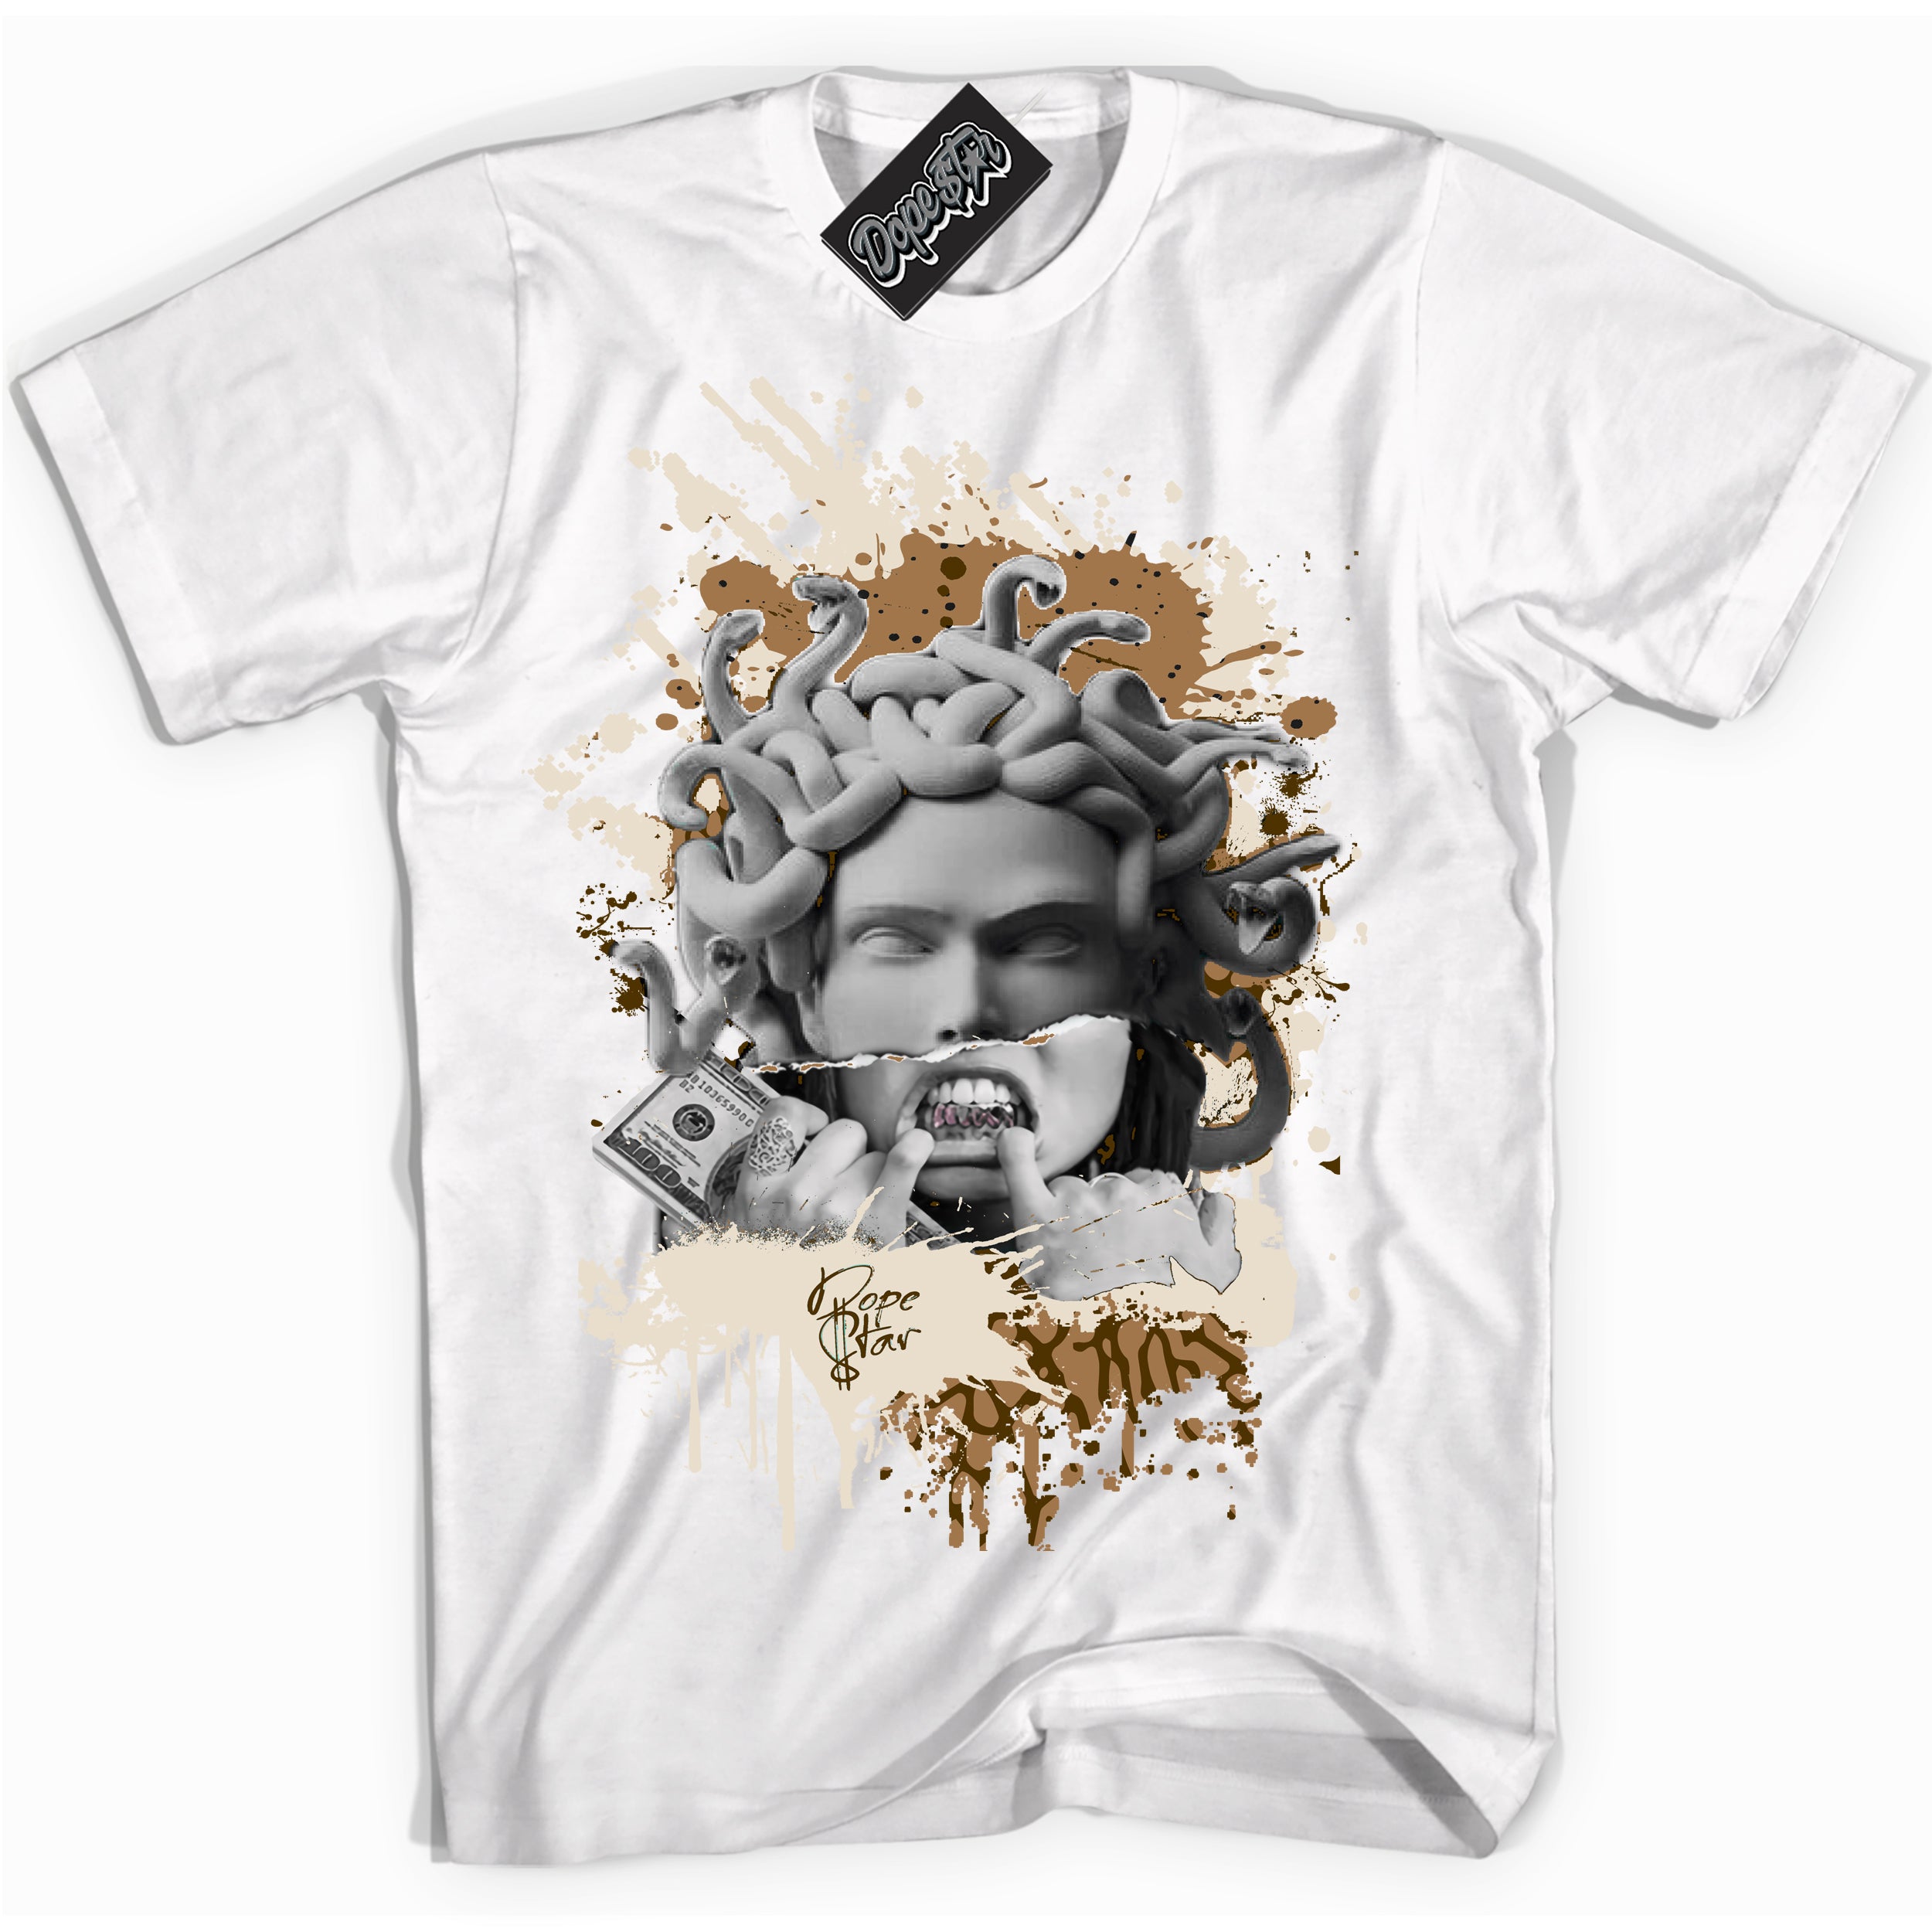 Cool White graphic tee with “ Medusa ” design, that perfectly matches Palomino 3s sneakers 